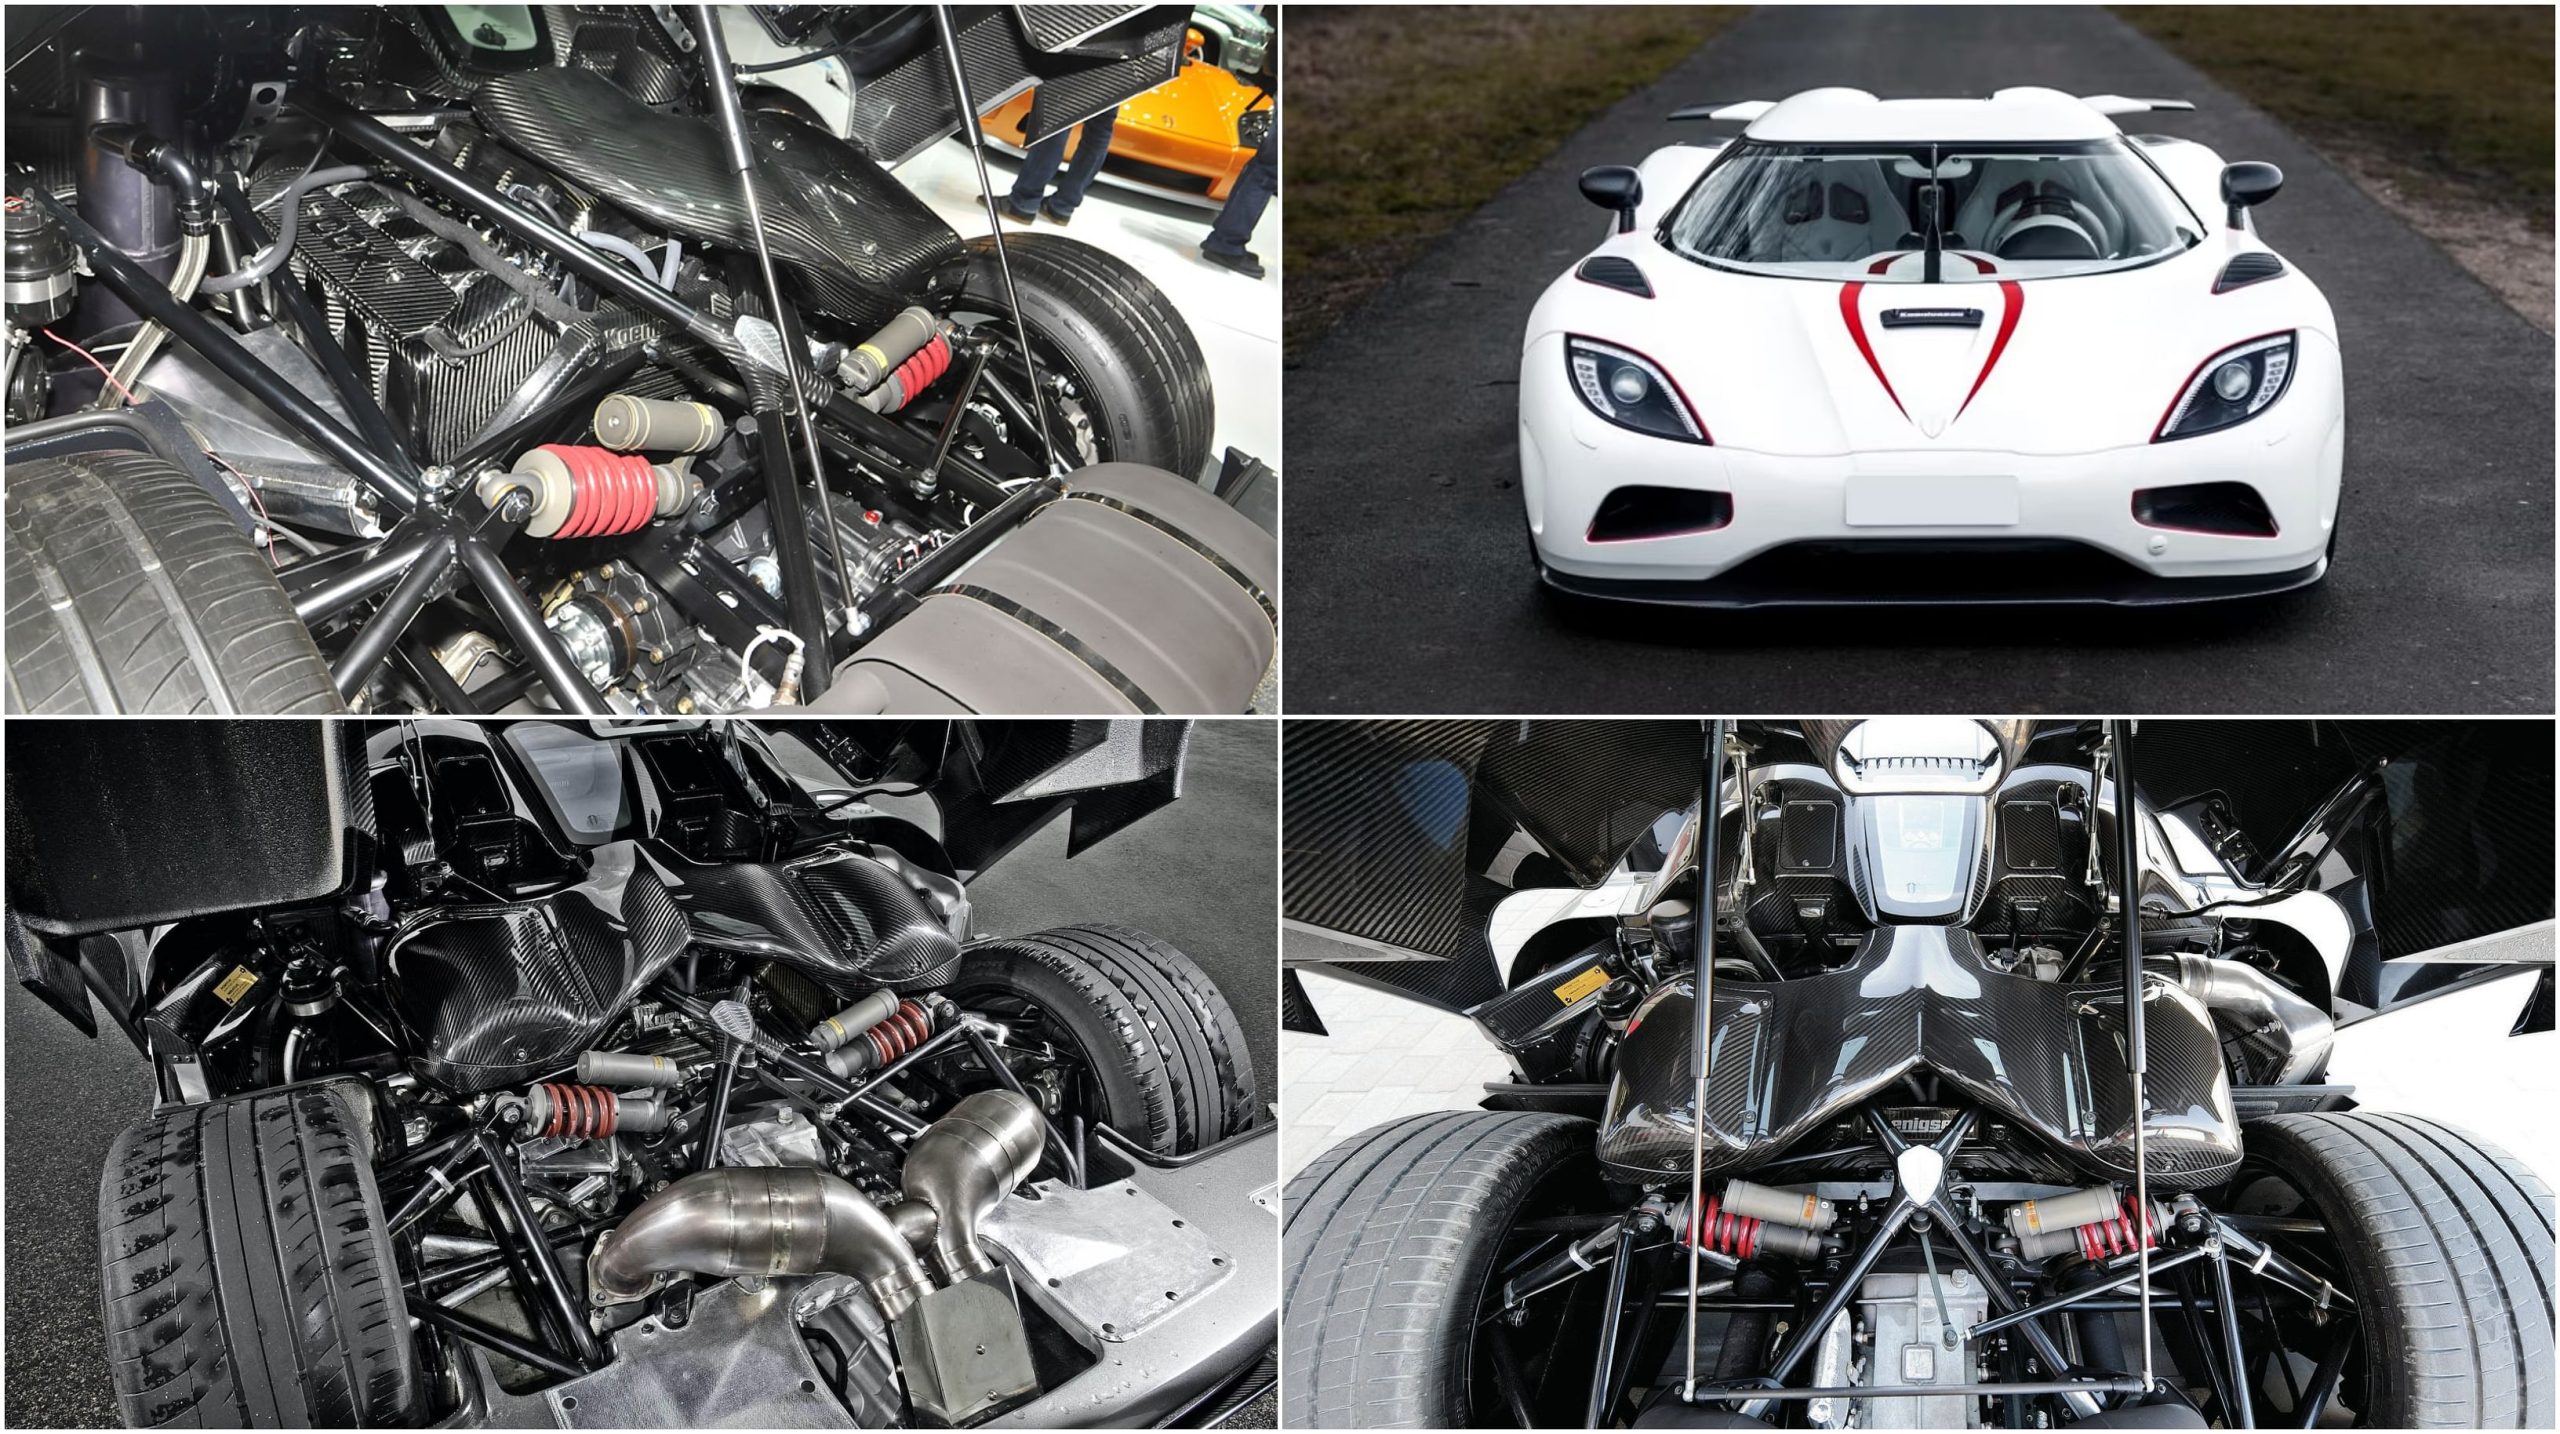 The Power Source of the Agera: